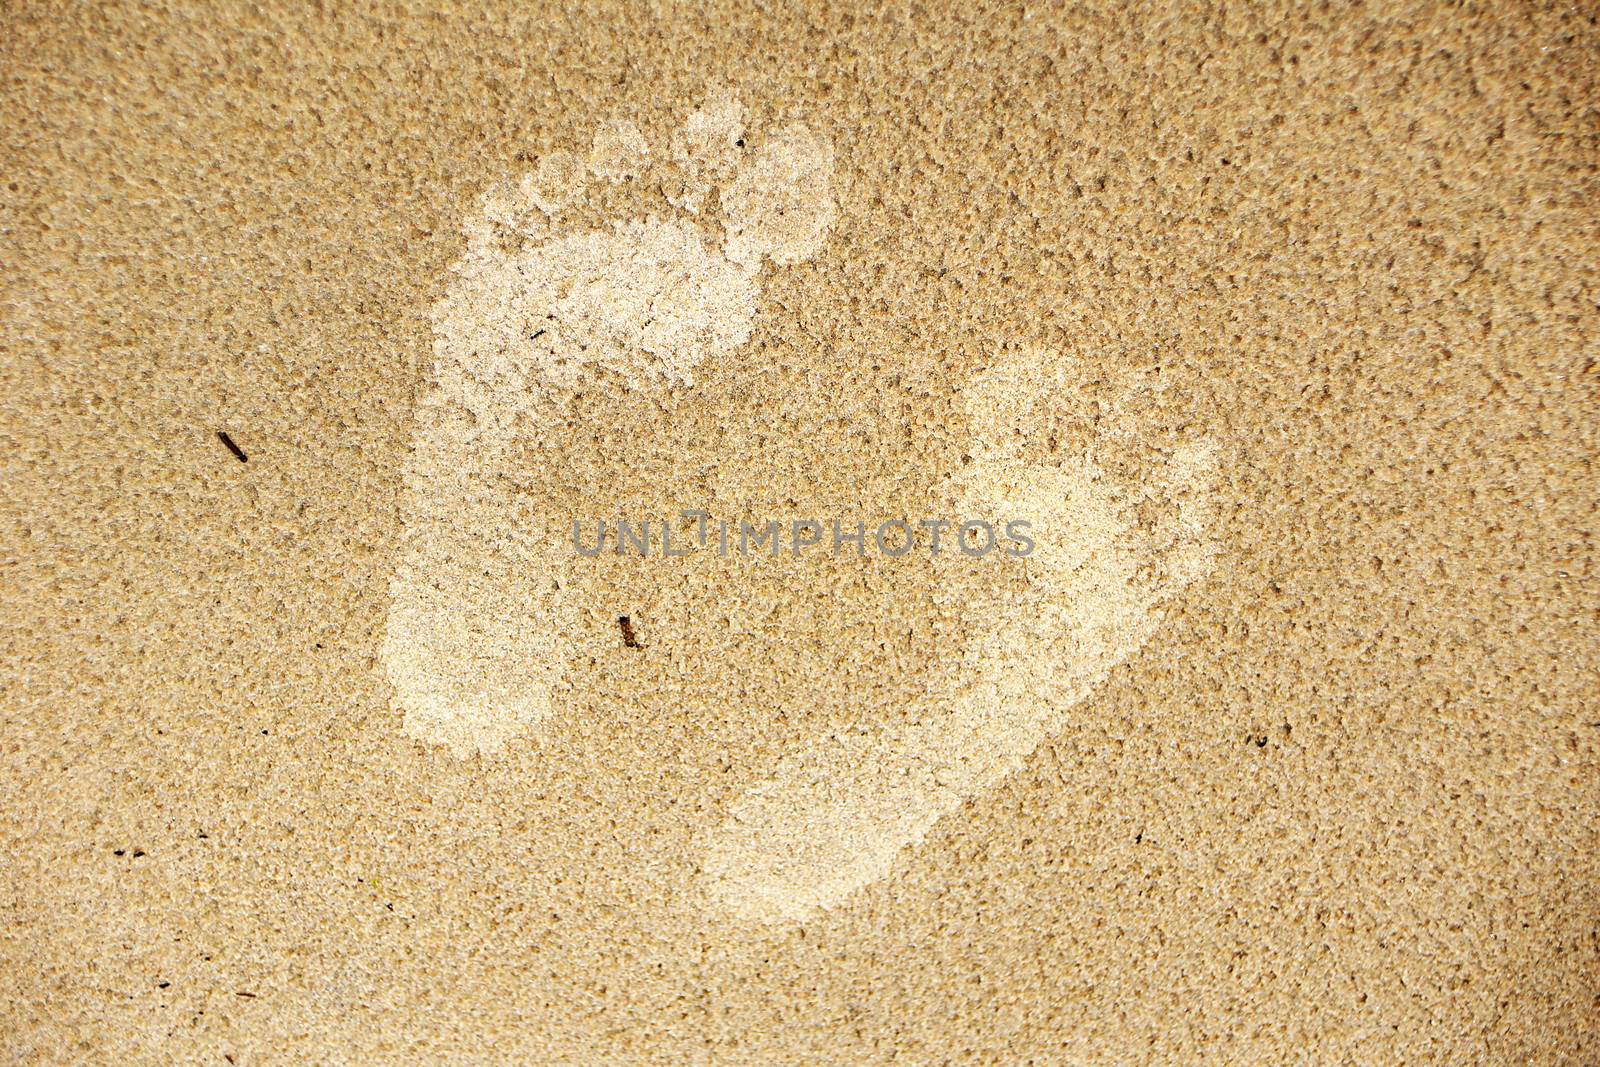 Footprints in the sand of a beach